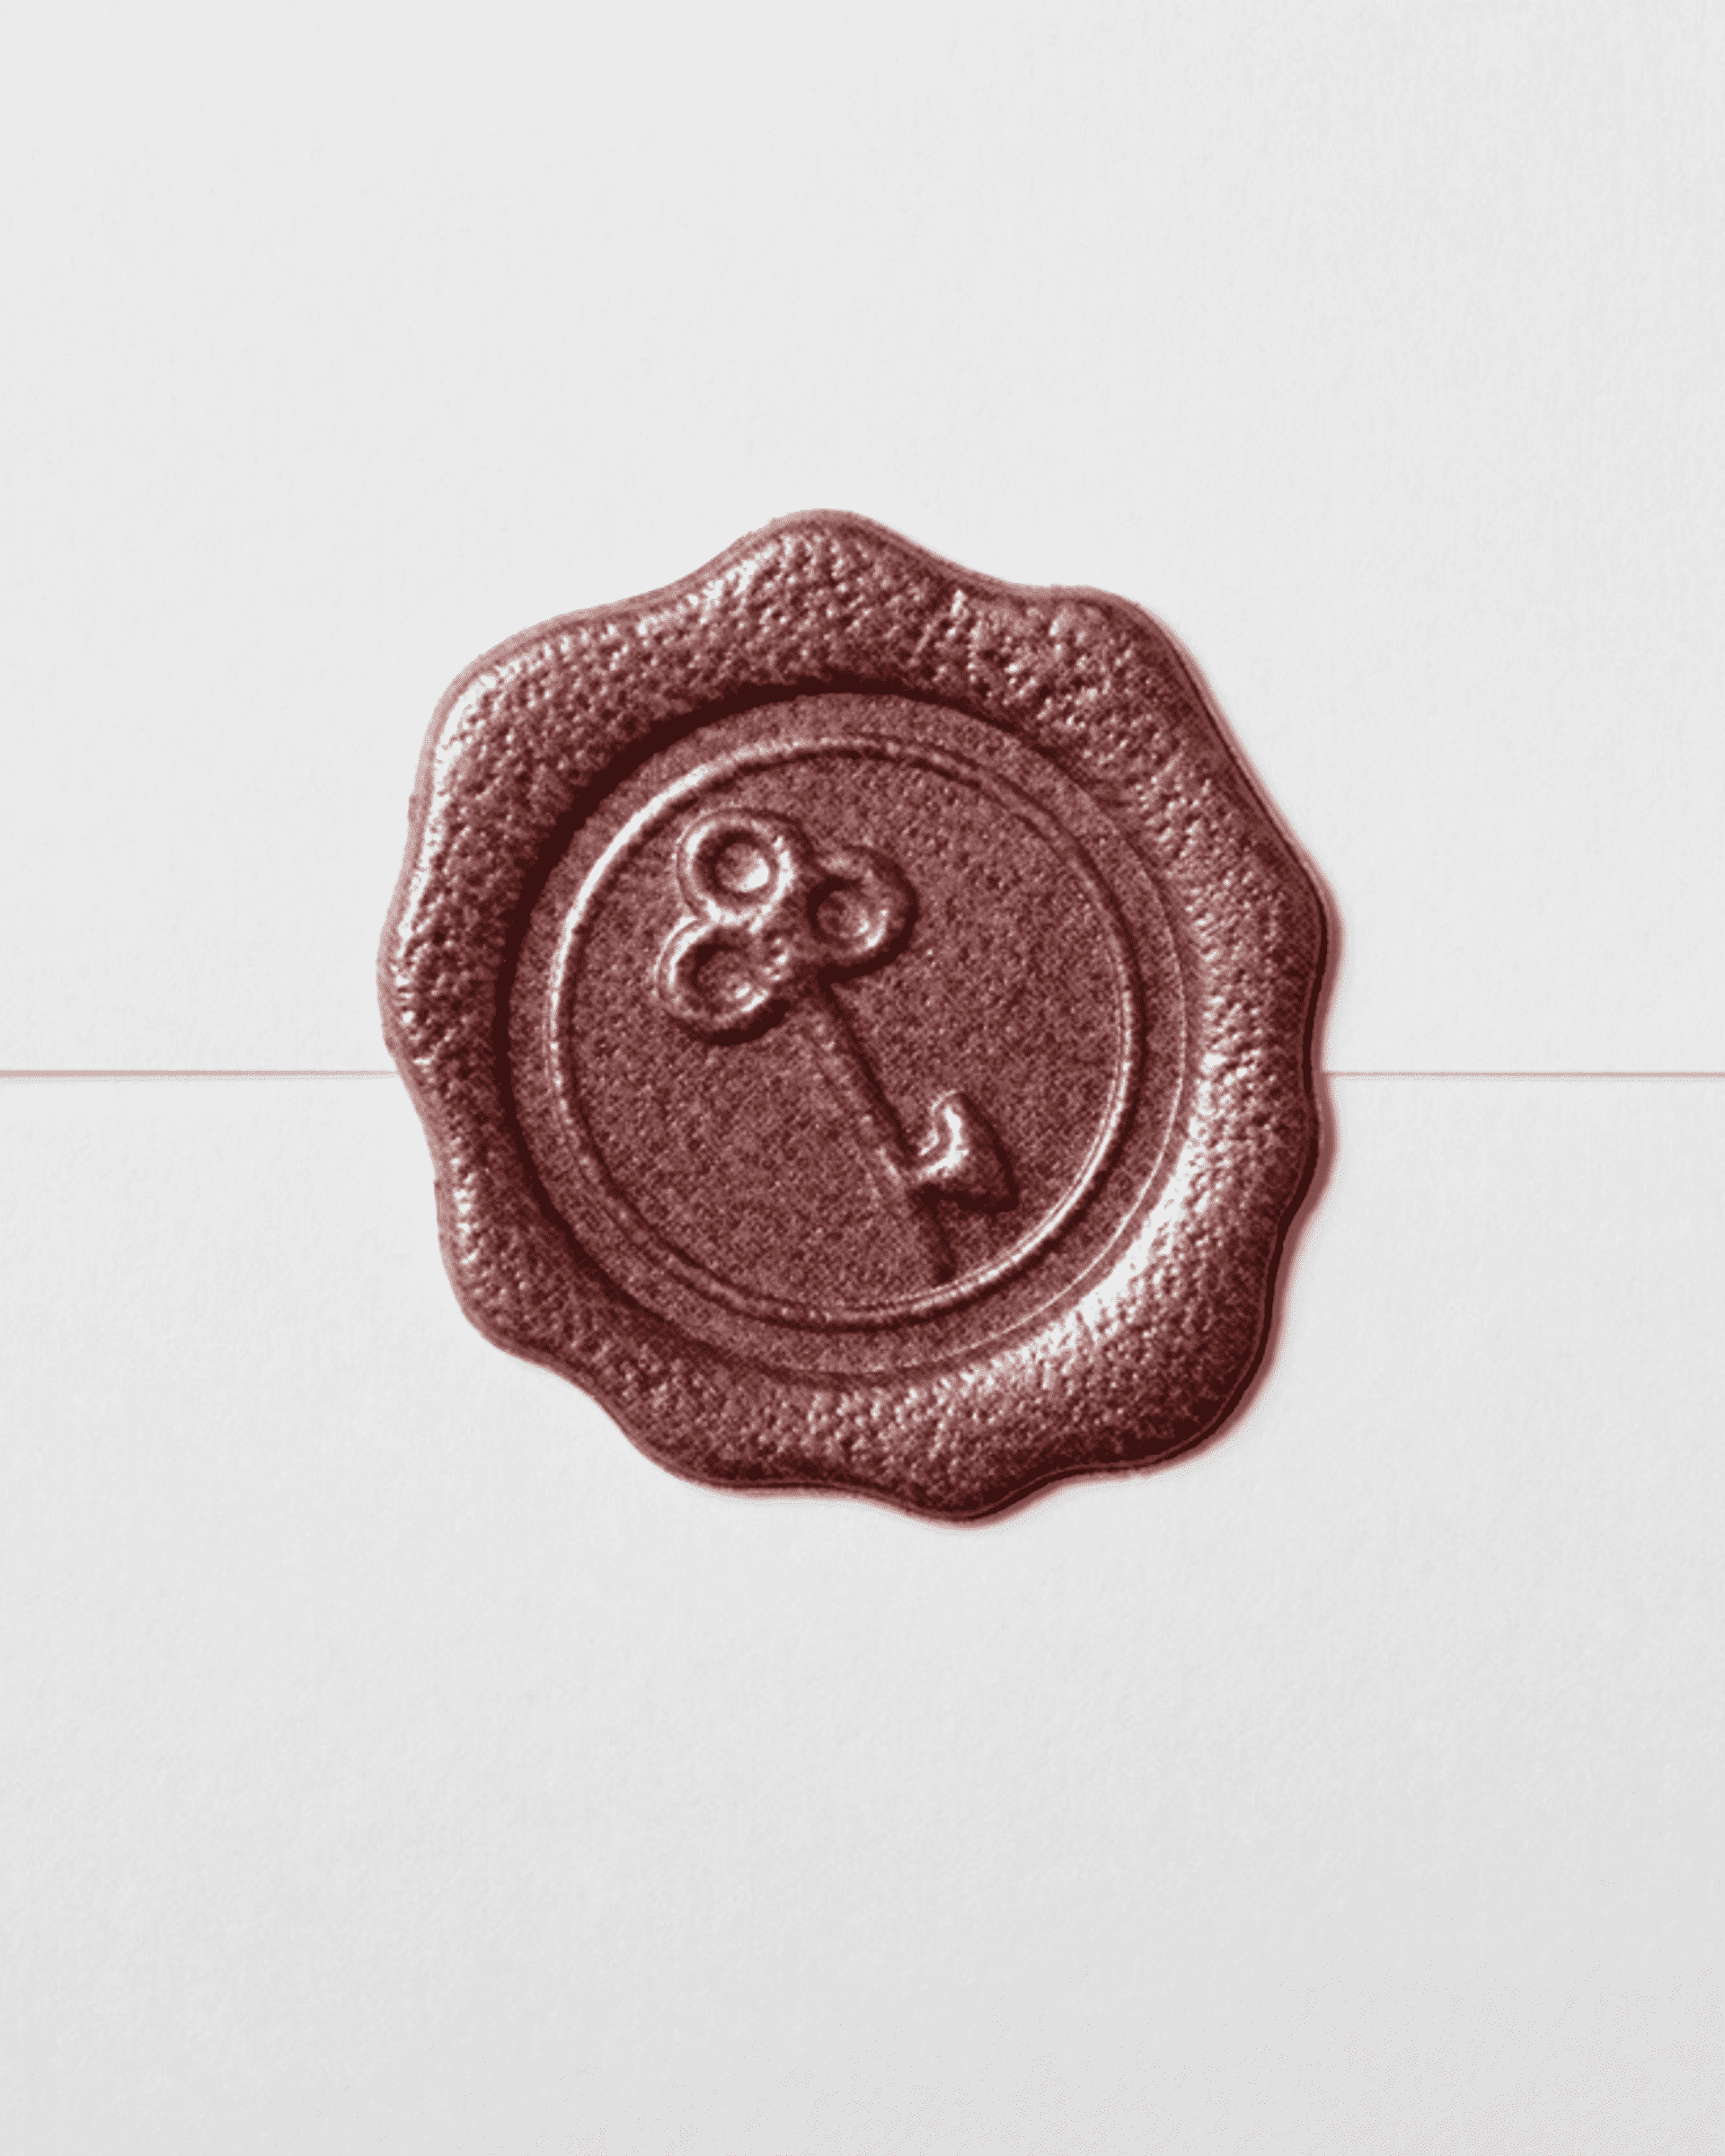 A red wax stamp with a key embossed sealing a white envelope.